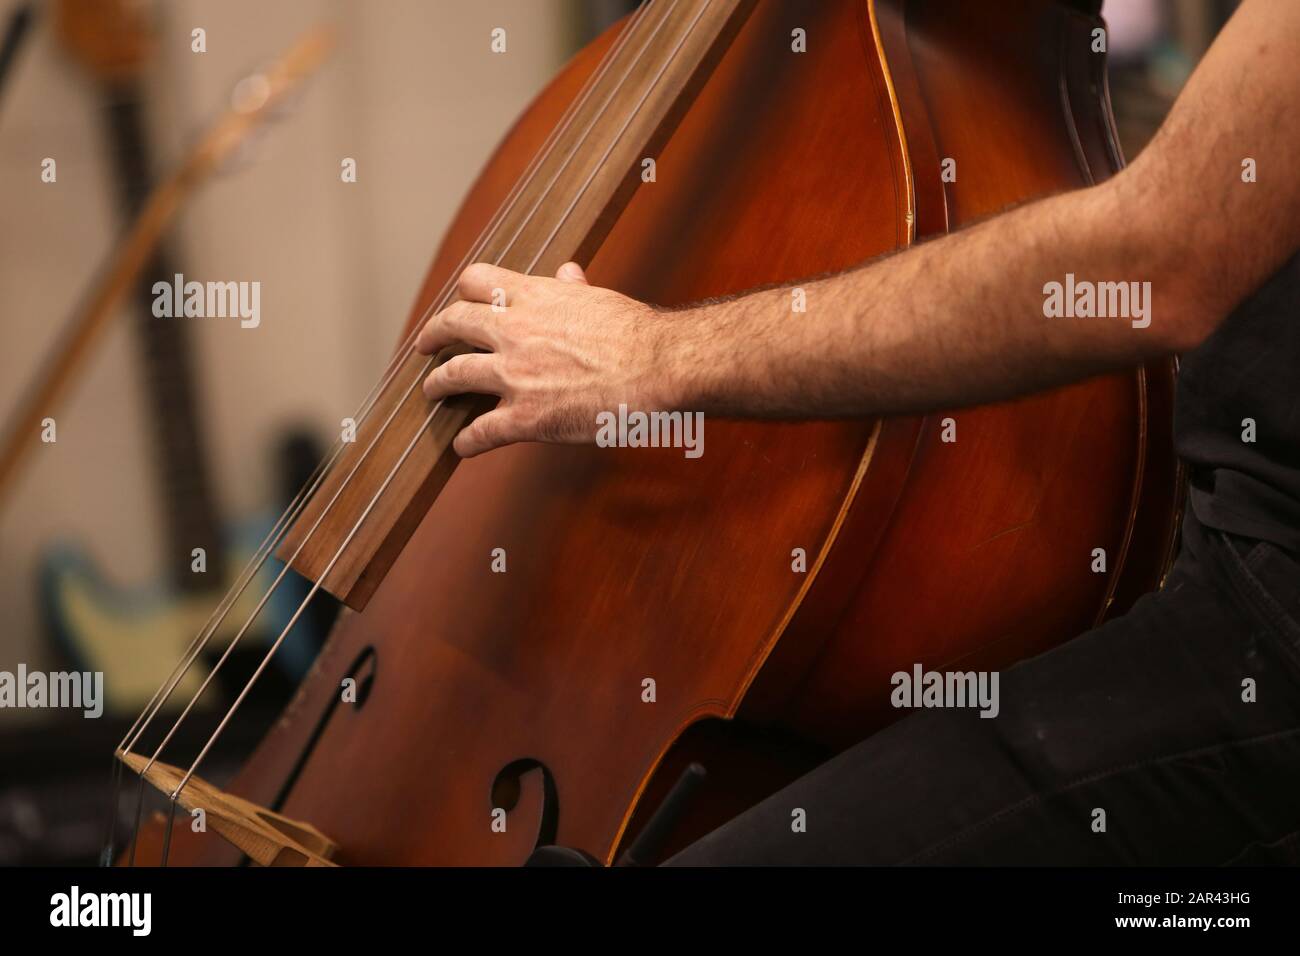 Closeup shot of a person playing the cello Stock Photo